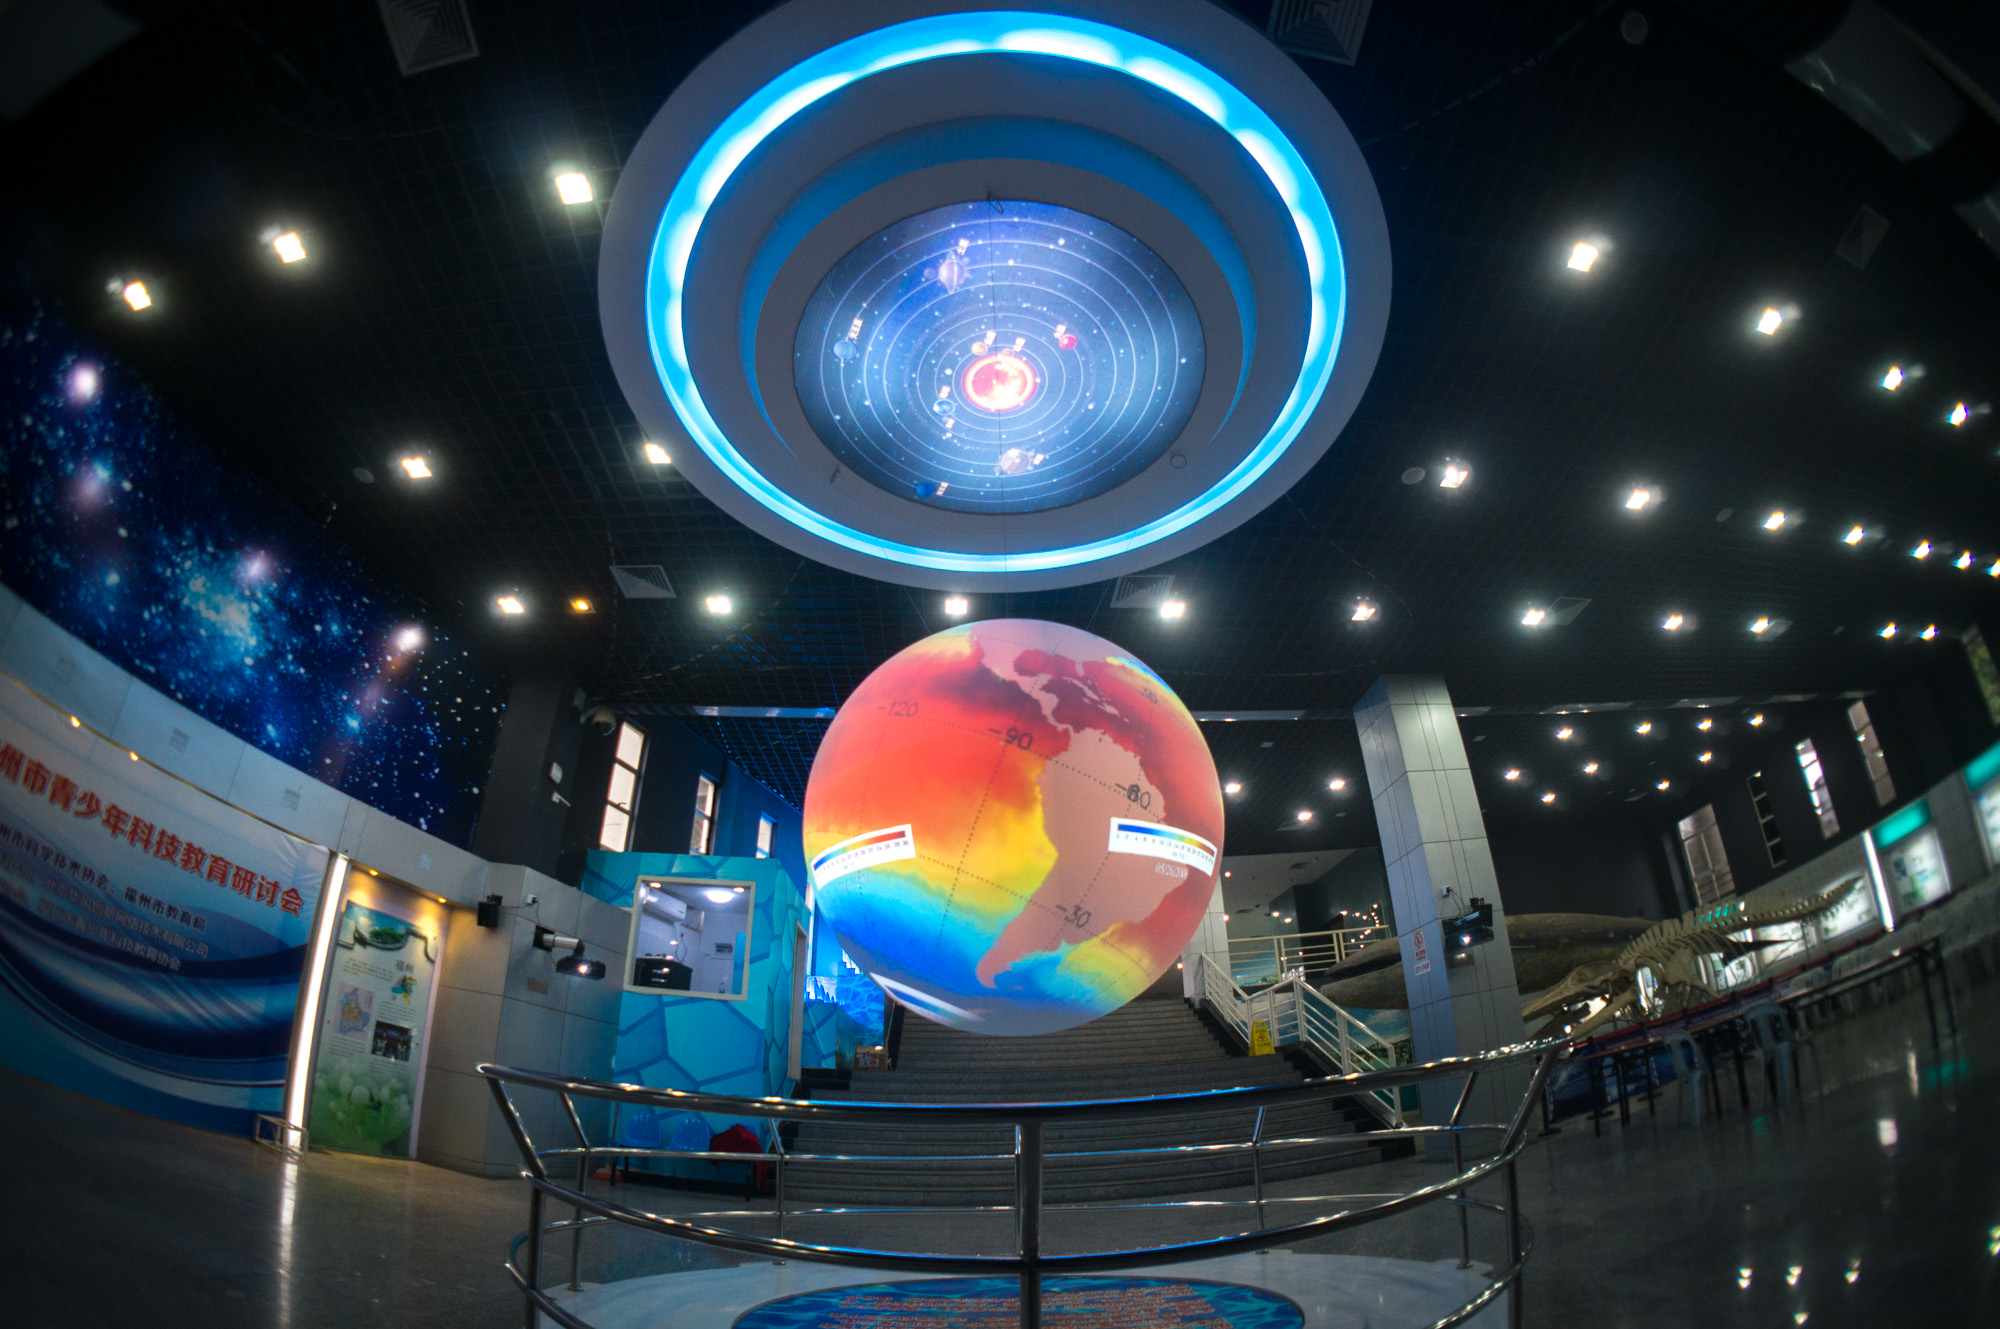 Science On a Sphere hangs in a large, well-lit exhibit space. The circular fixture from which it hangs glows blue and displays a diagram of the solar system. In the background, a model and a skeleton of a whale are both visible